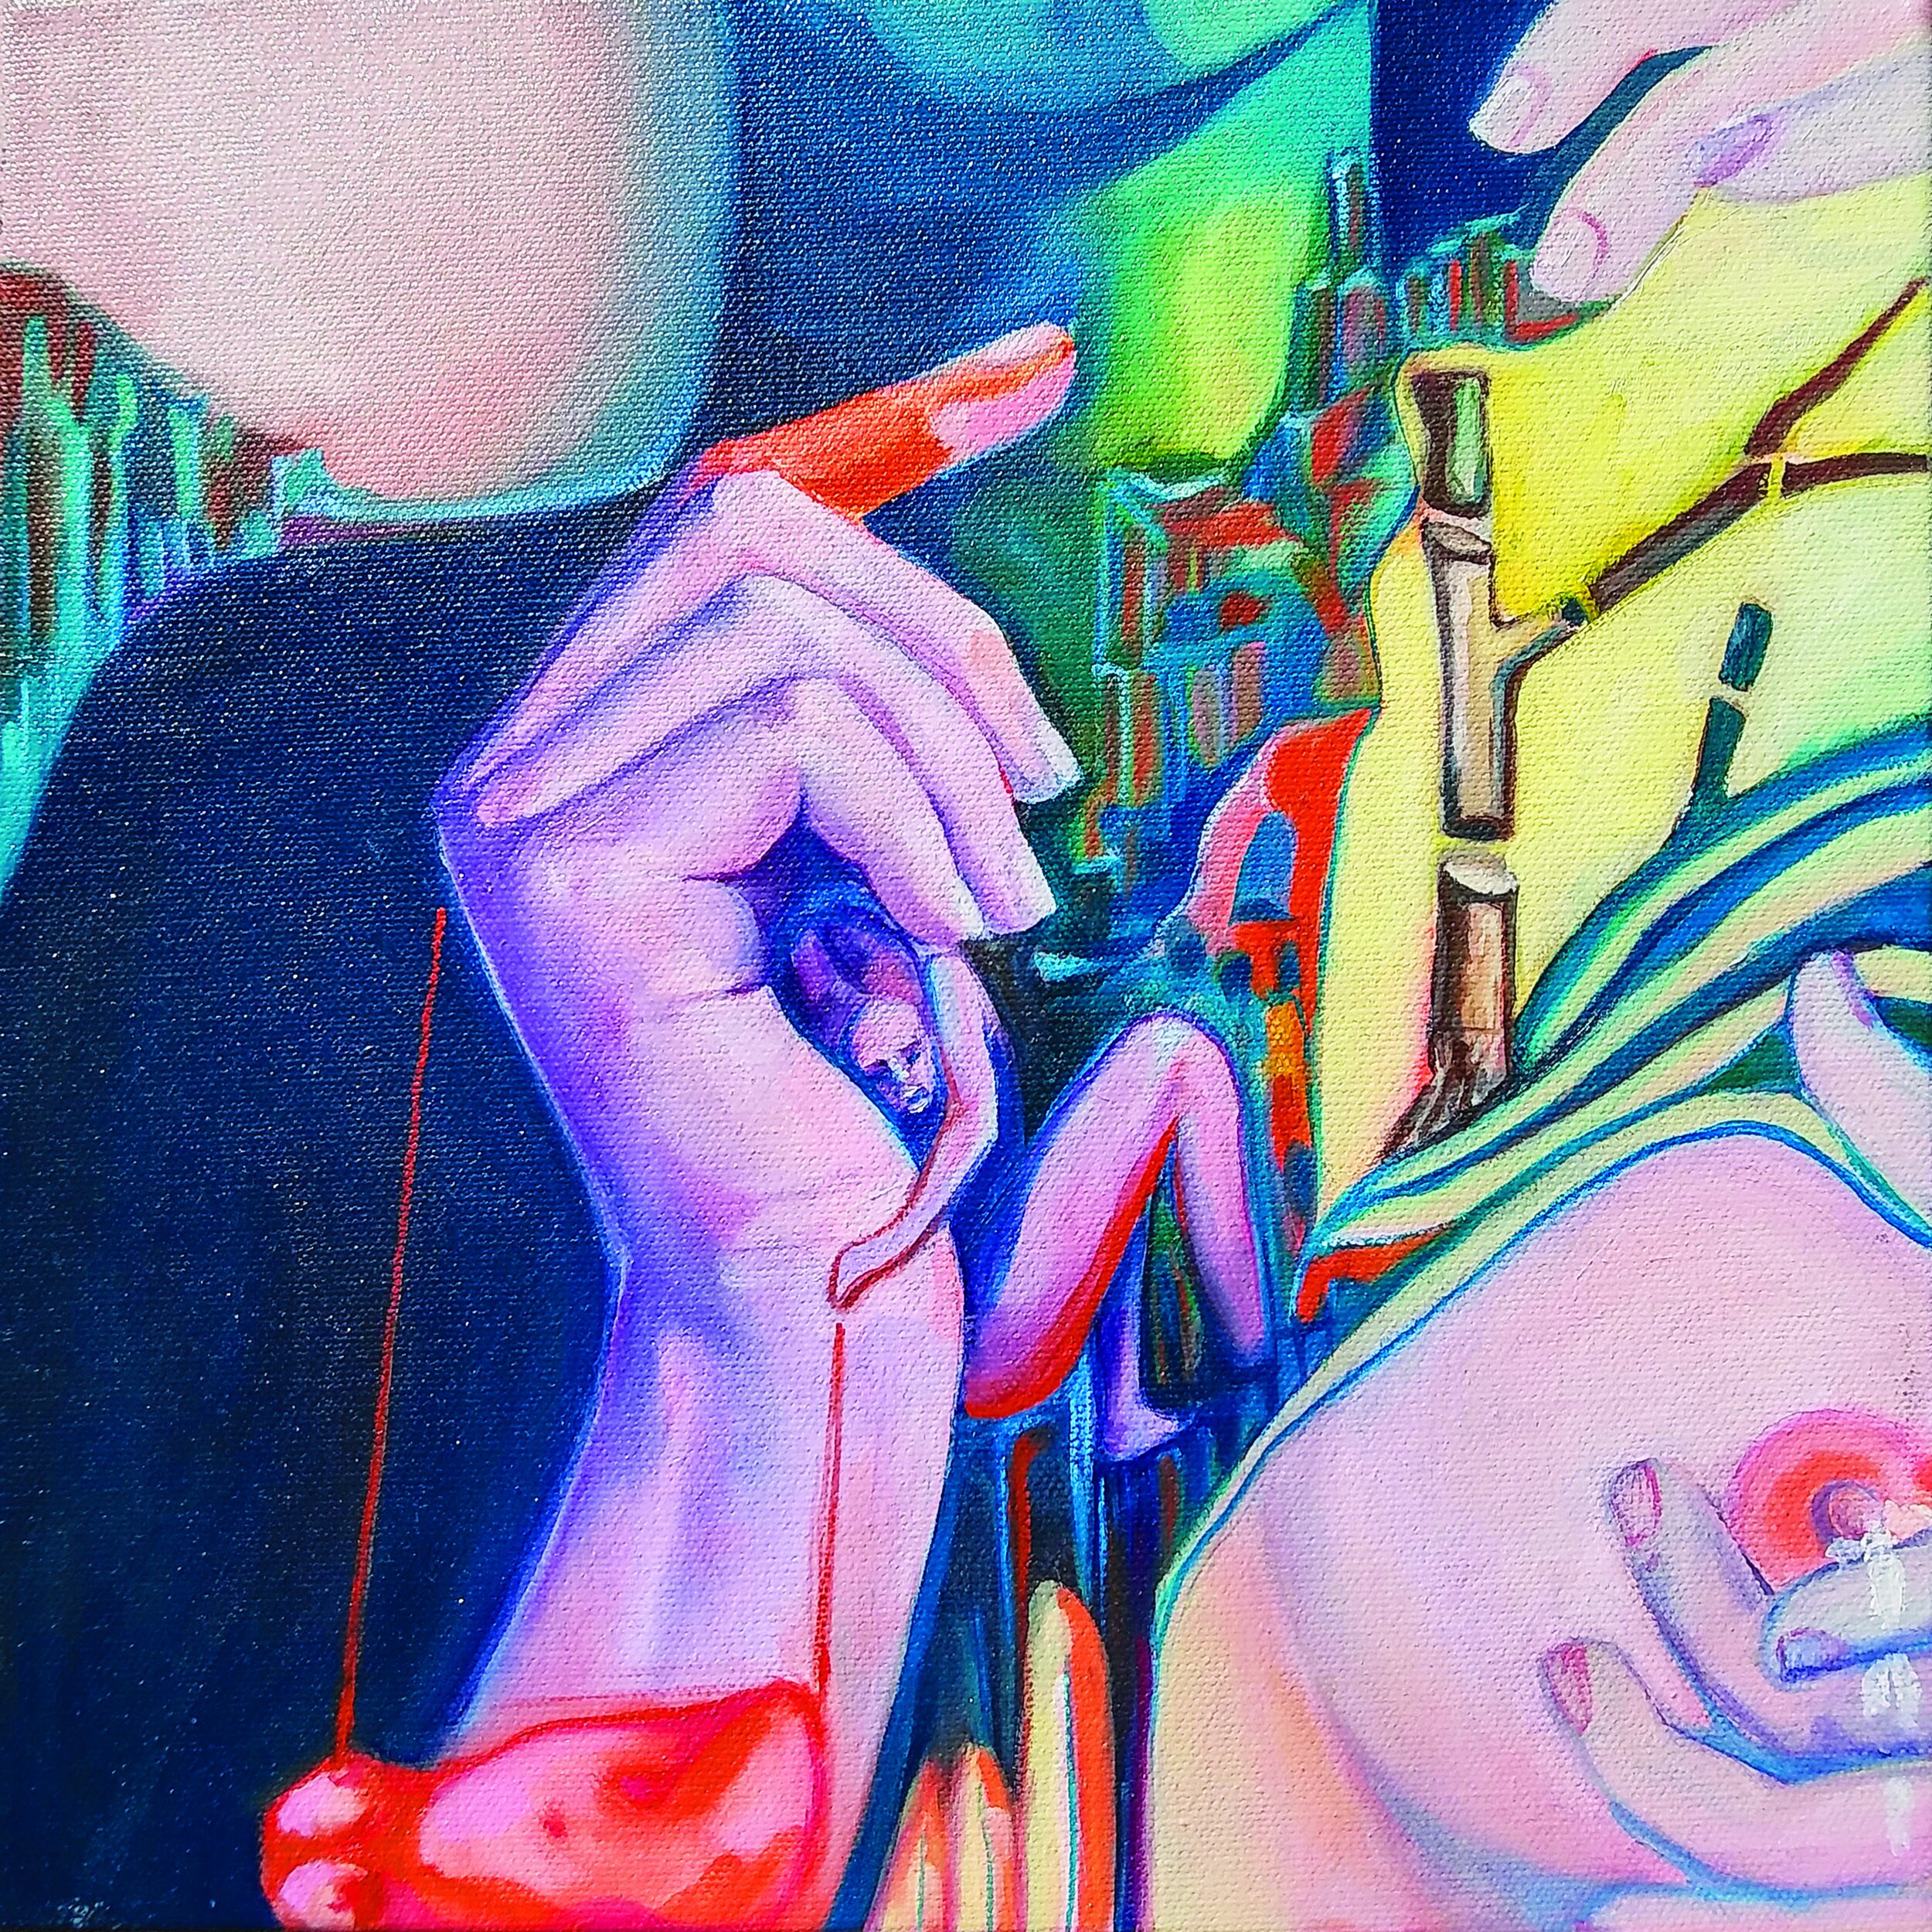 Decentralization of the Persistence of Memory, oil on canvas, 12in X 12in, 2017